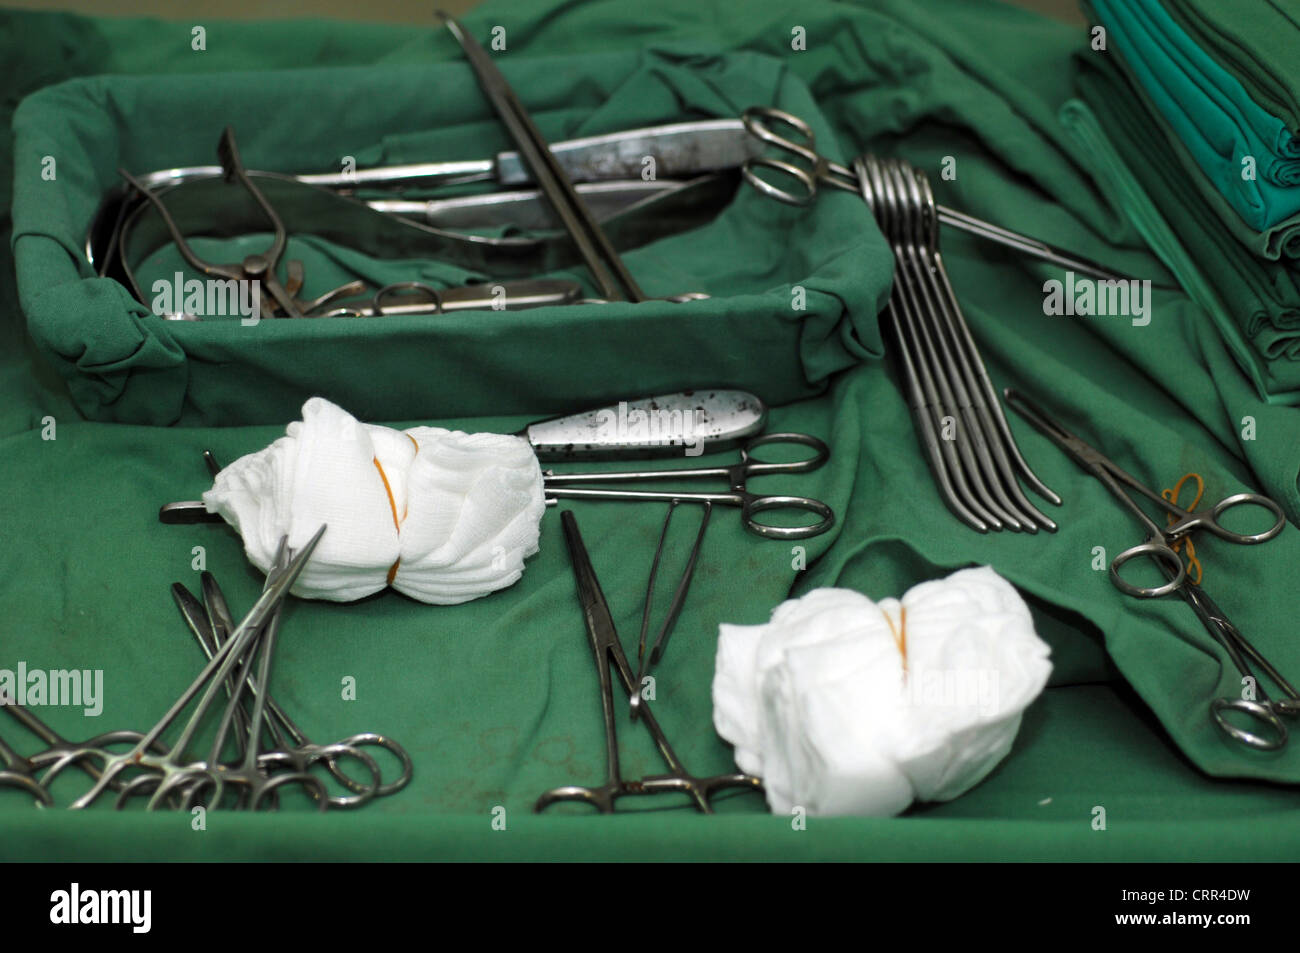 Surgical tools and bandages ready for use in surgery Stock Photo